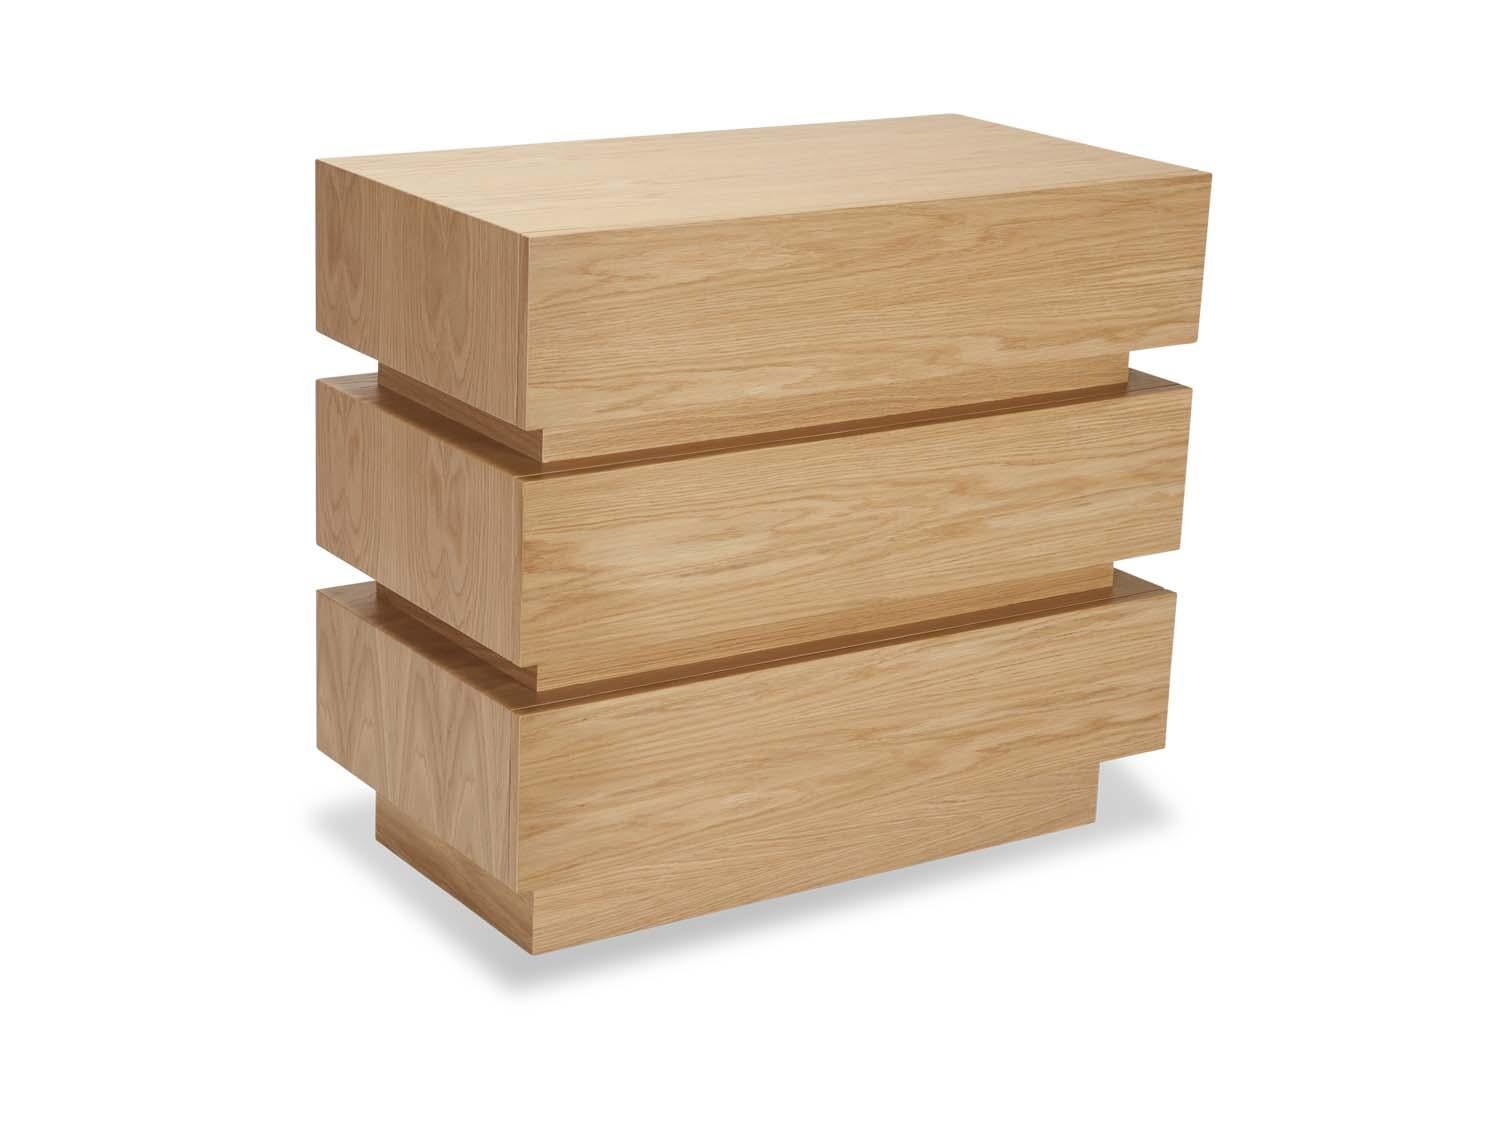 The stacked box chest is a larger modified version of the stacked box nightstand. The piece features three drawers and an inset detail that can be finished with brass plating. Available in American walnut, white oak, or pigmented oak. 

The